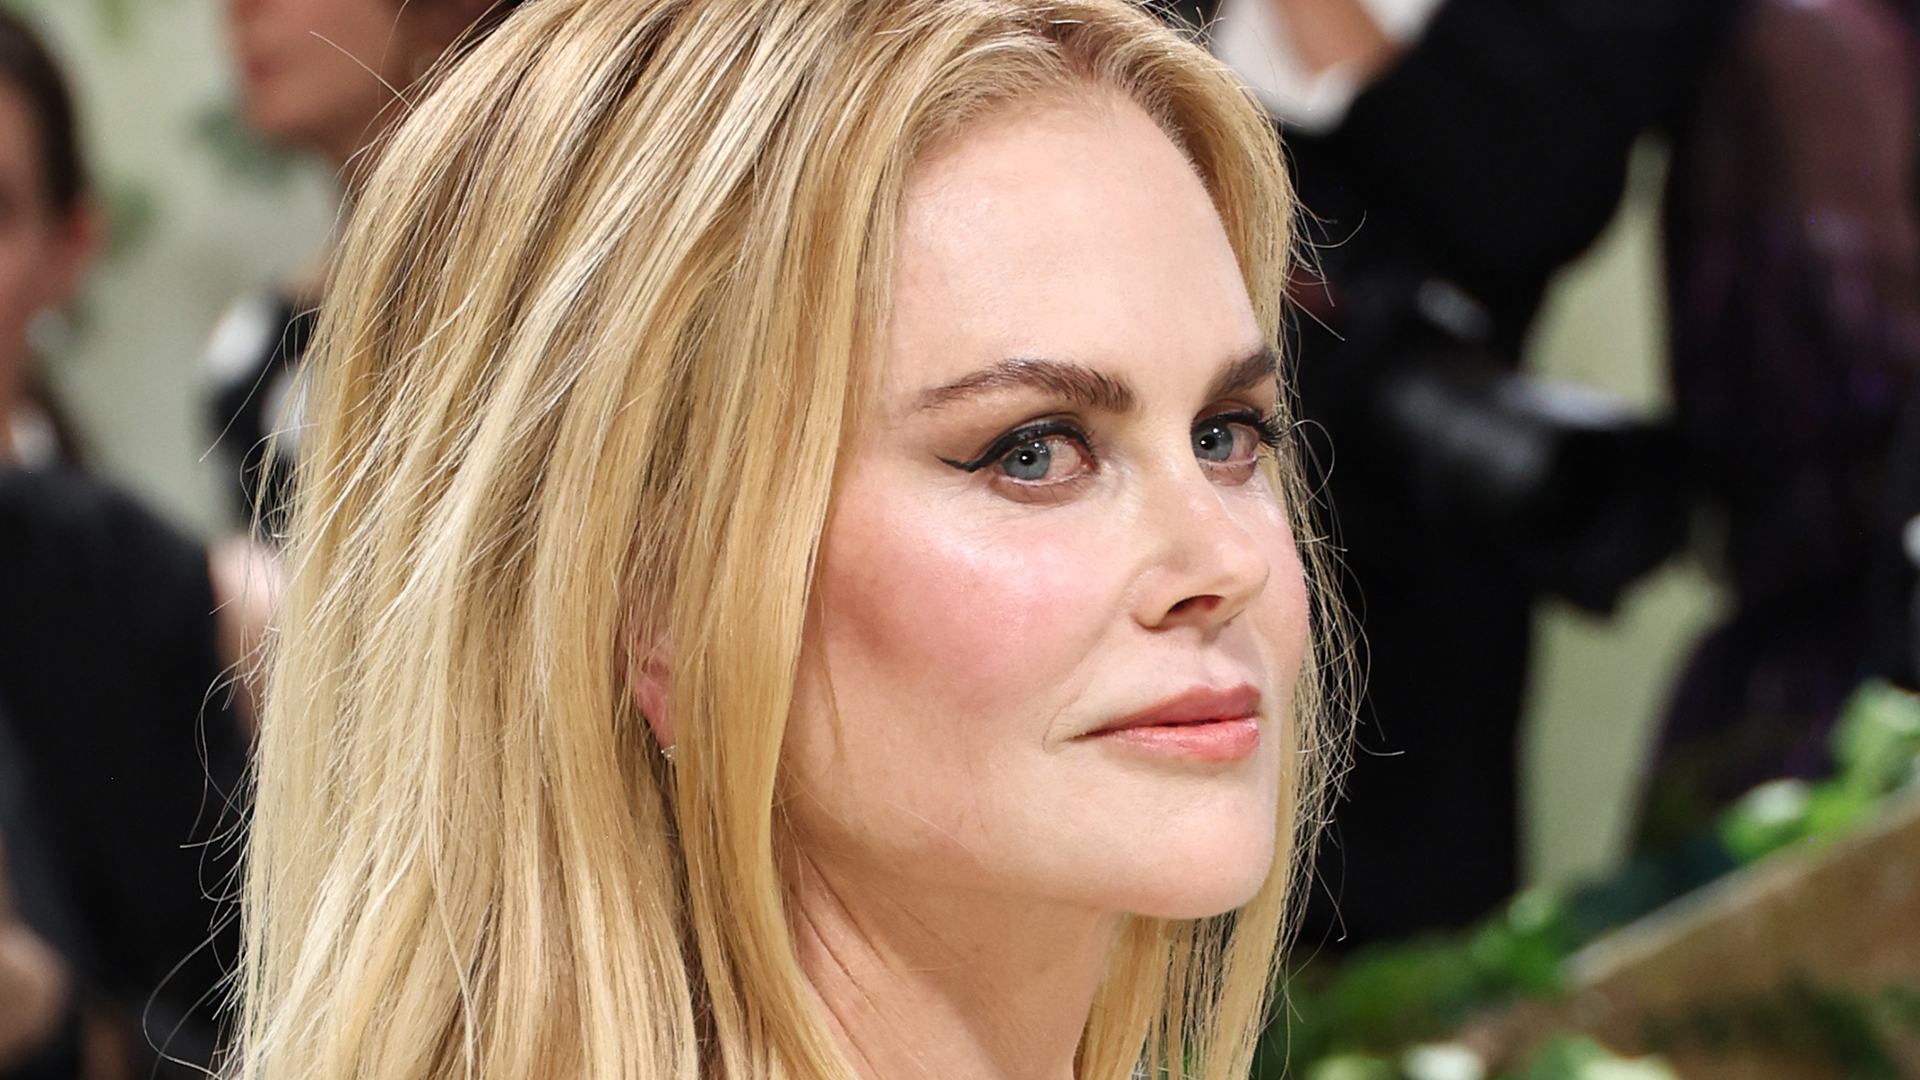 Nicole Kidman’s fave hair growth serum that made her locks ‘noticeably less frizzy’ – shoppers say it’s a ‘must-have’ [Video]